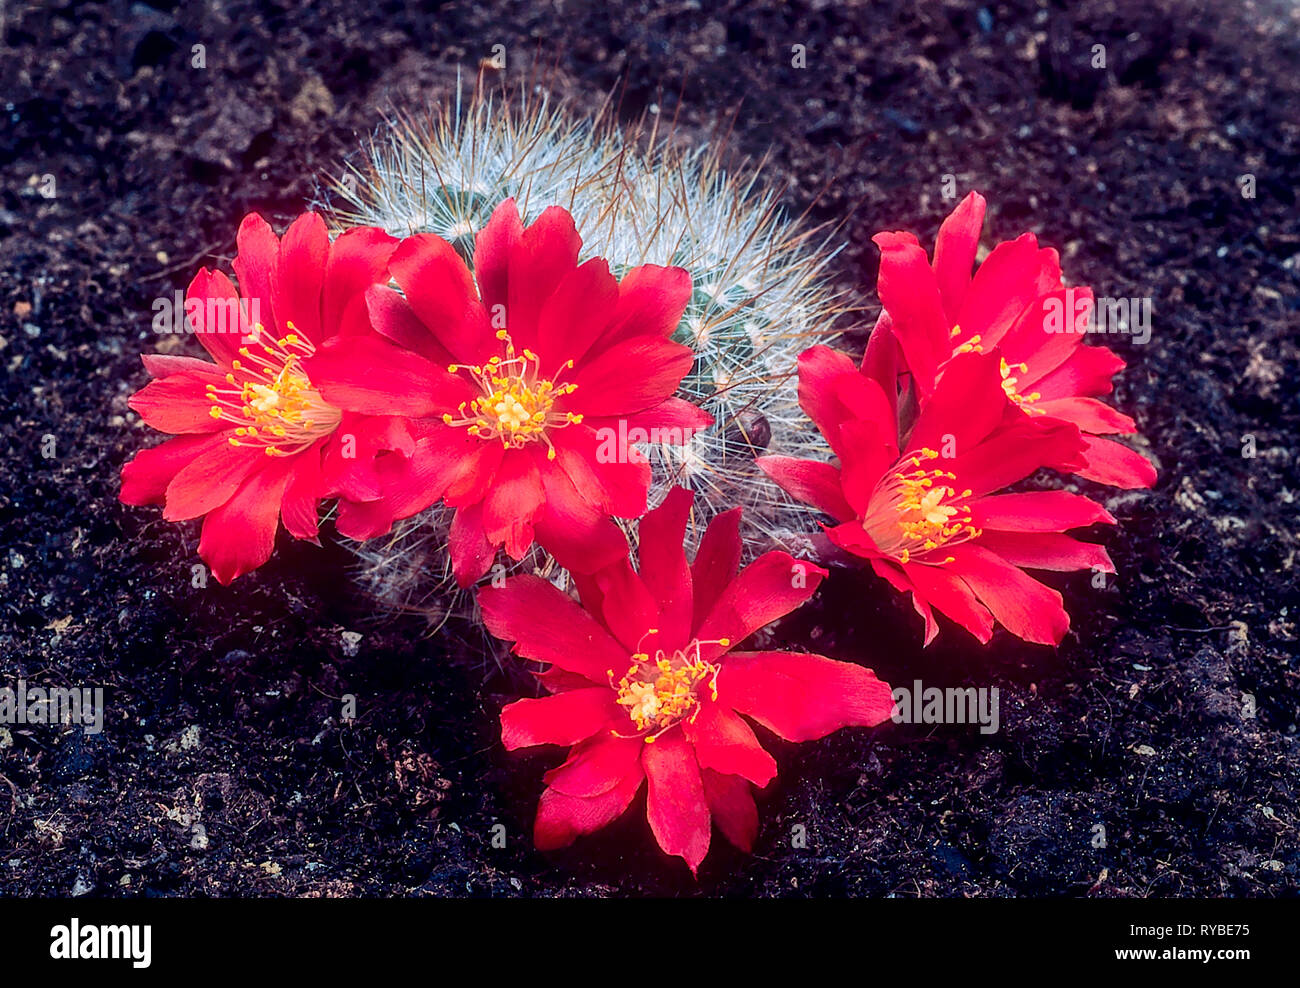 Cacti Rebutia Aylostera sp escayachi with lots of red flowers Stock Photo